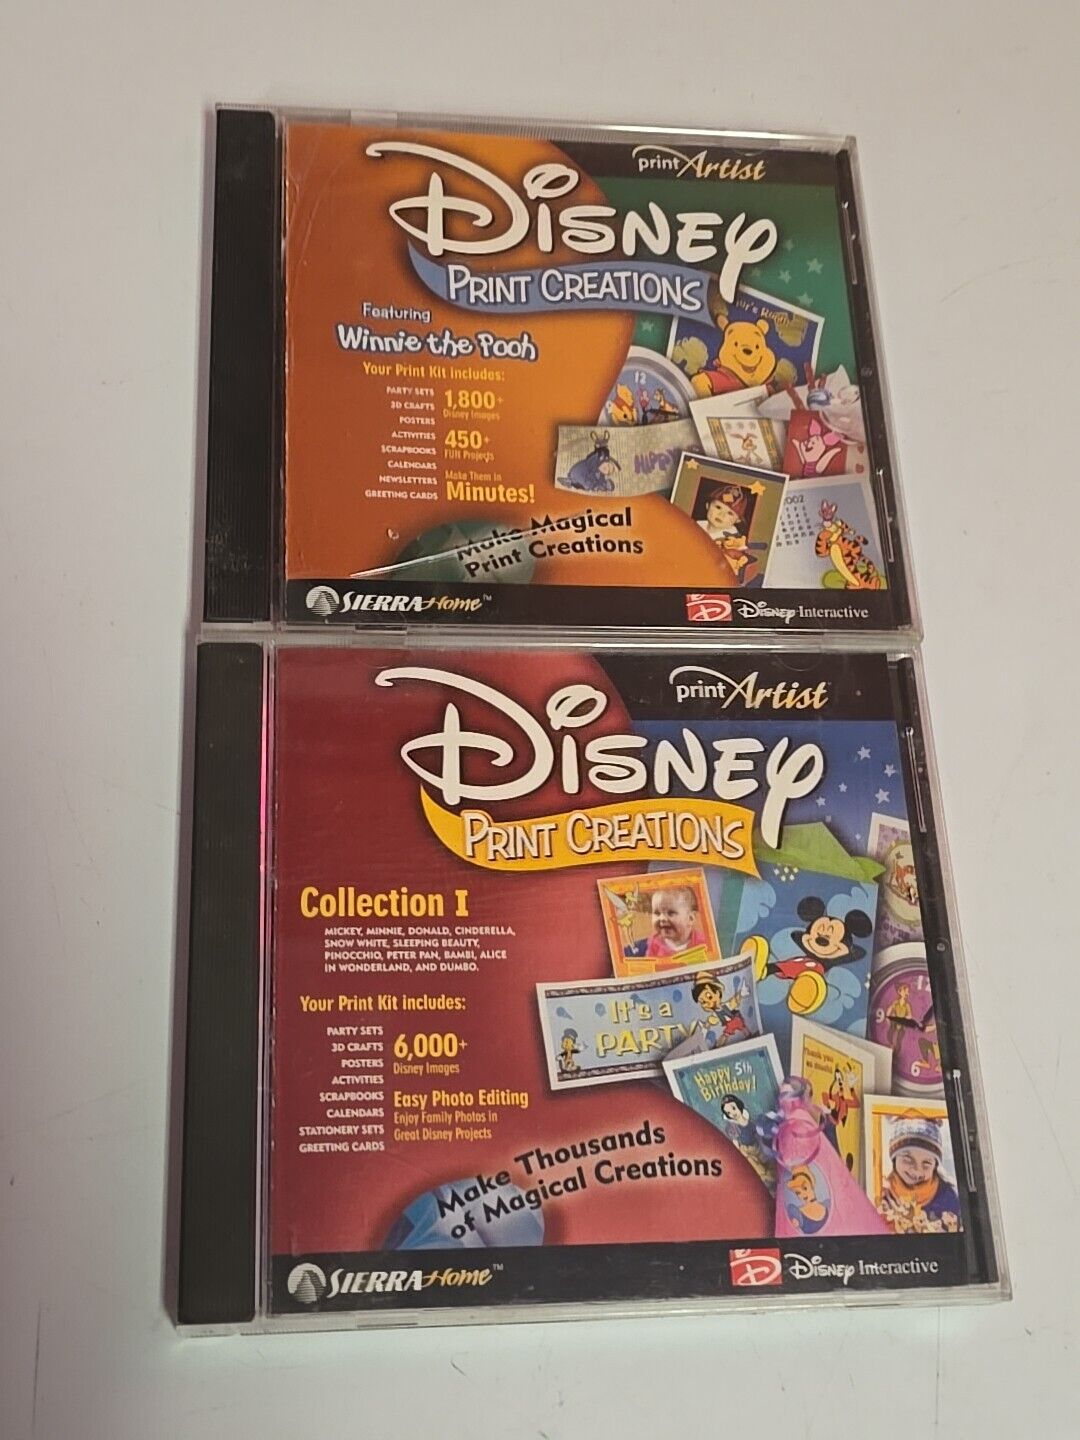 Disney Print Creations Collection 1 + Winnie the Pooh PC CD Rom 2 Pack New 